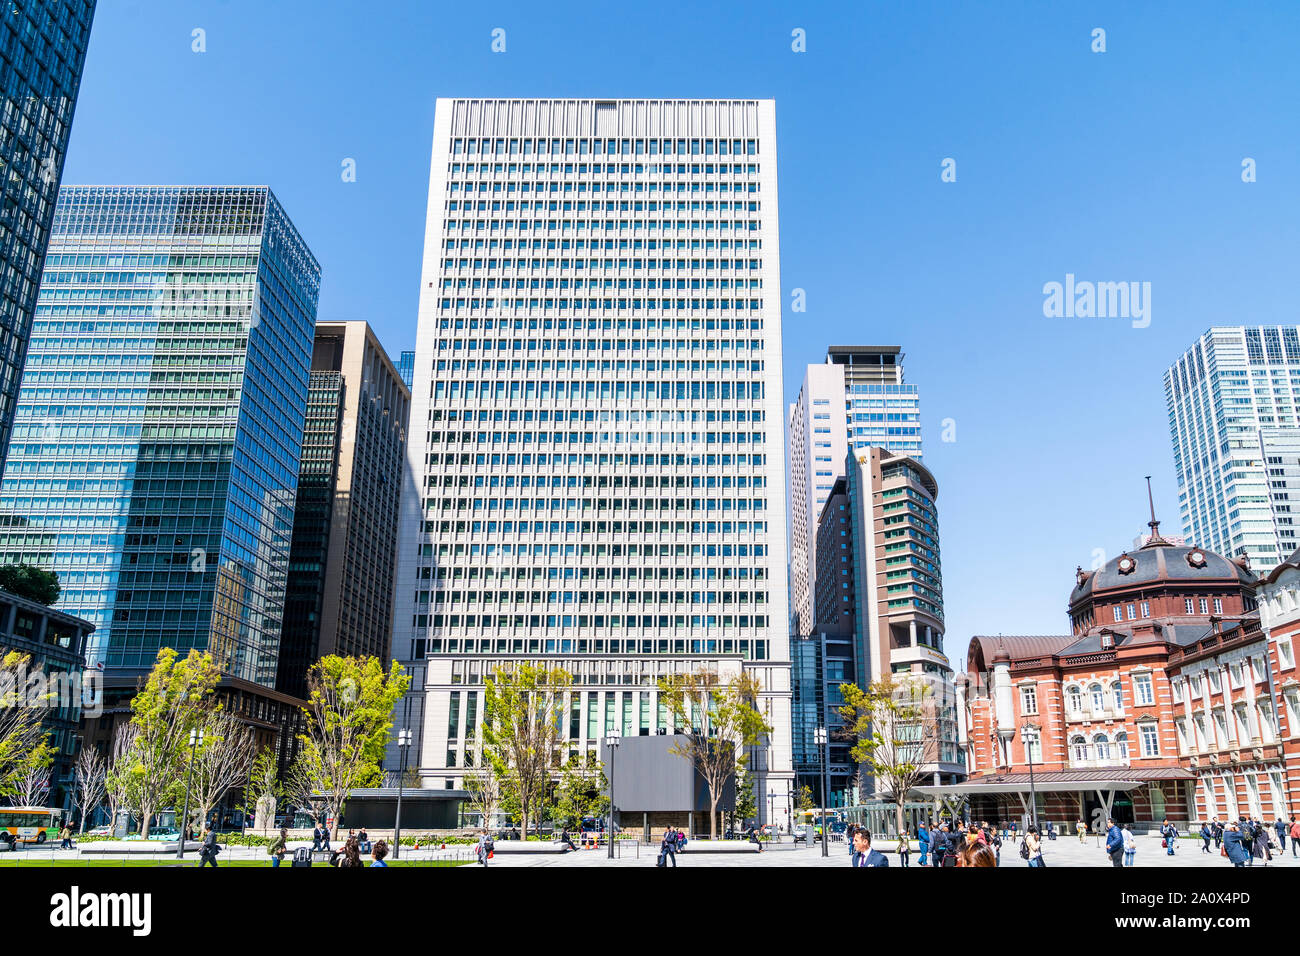 Tokyo, the 28 story skyscraper, Nihon Seimei Marunouchi Building on a springtime day. Foreground, people, trees and part of Tokyo station. Blue sky. Stock Photo